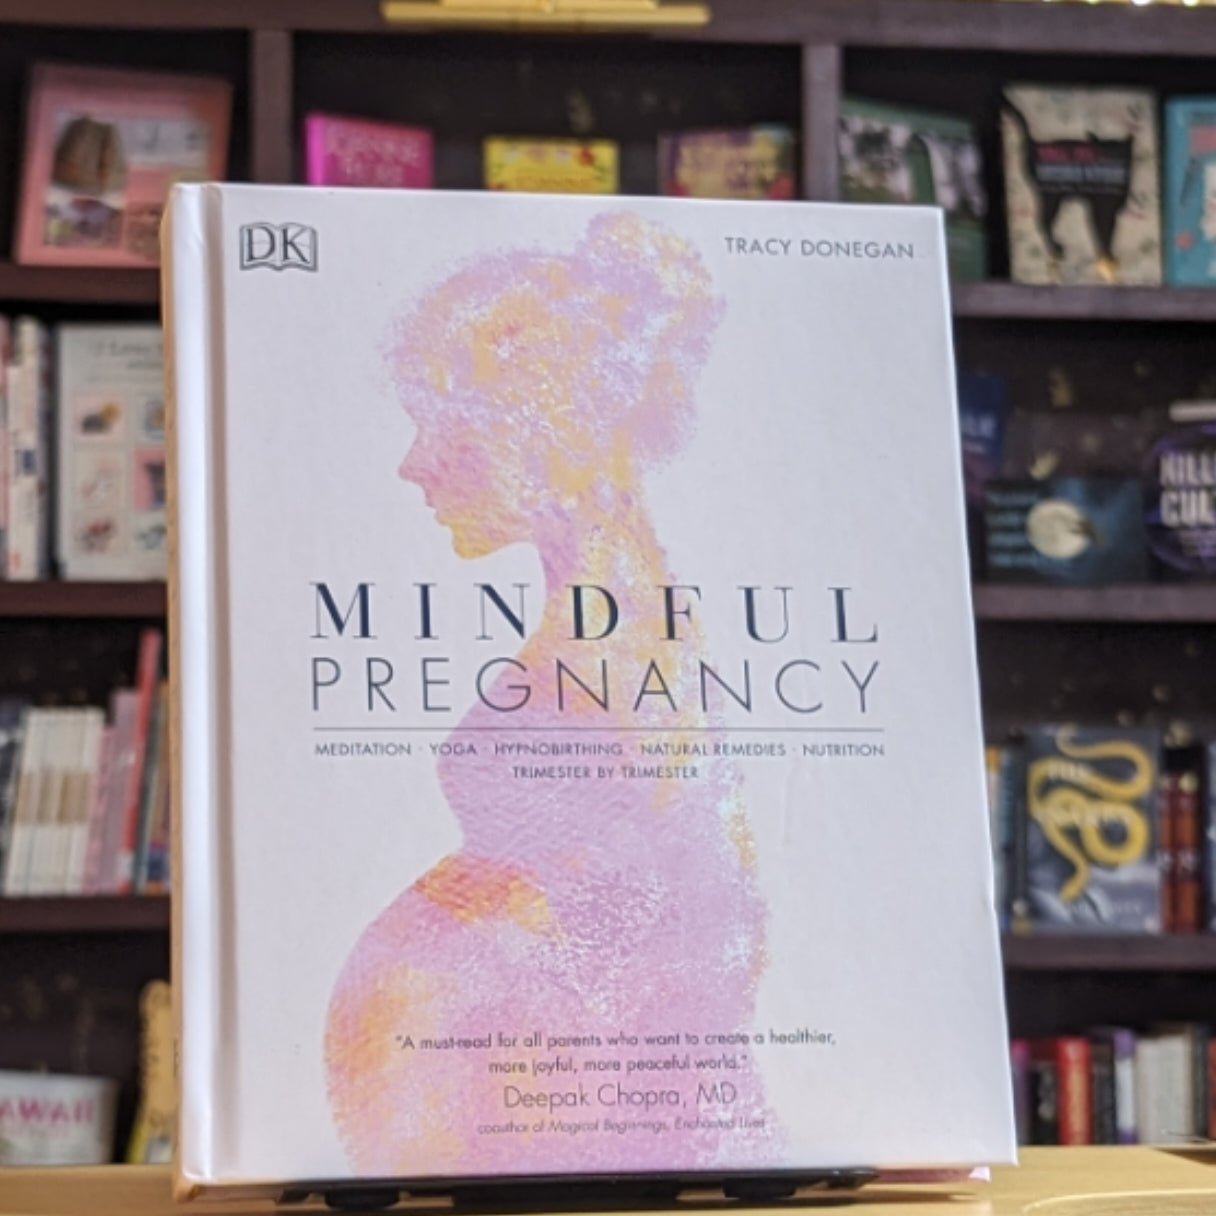 Mindful Pregnancy: Meditation, Yoga, Hypnobirthing, Natural Remedies and Nutrition